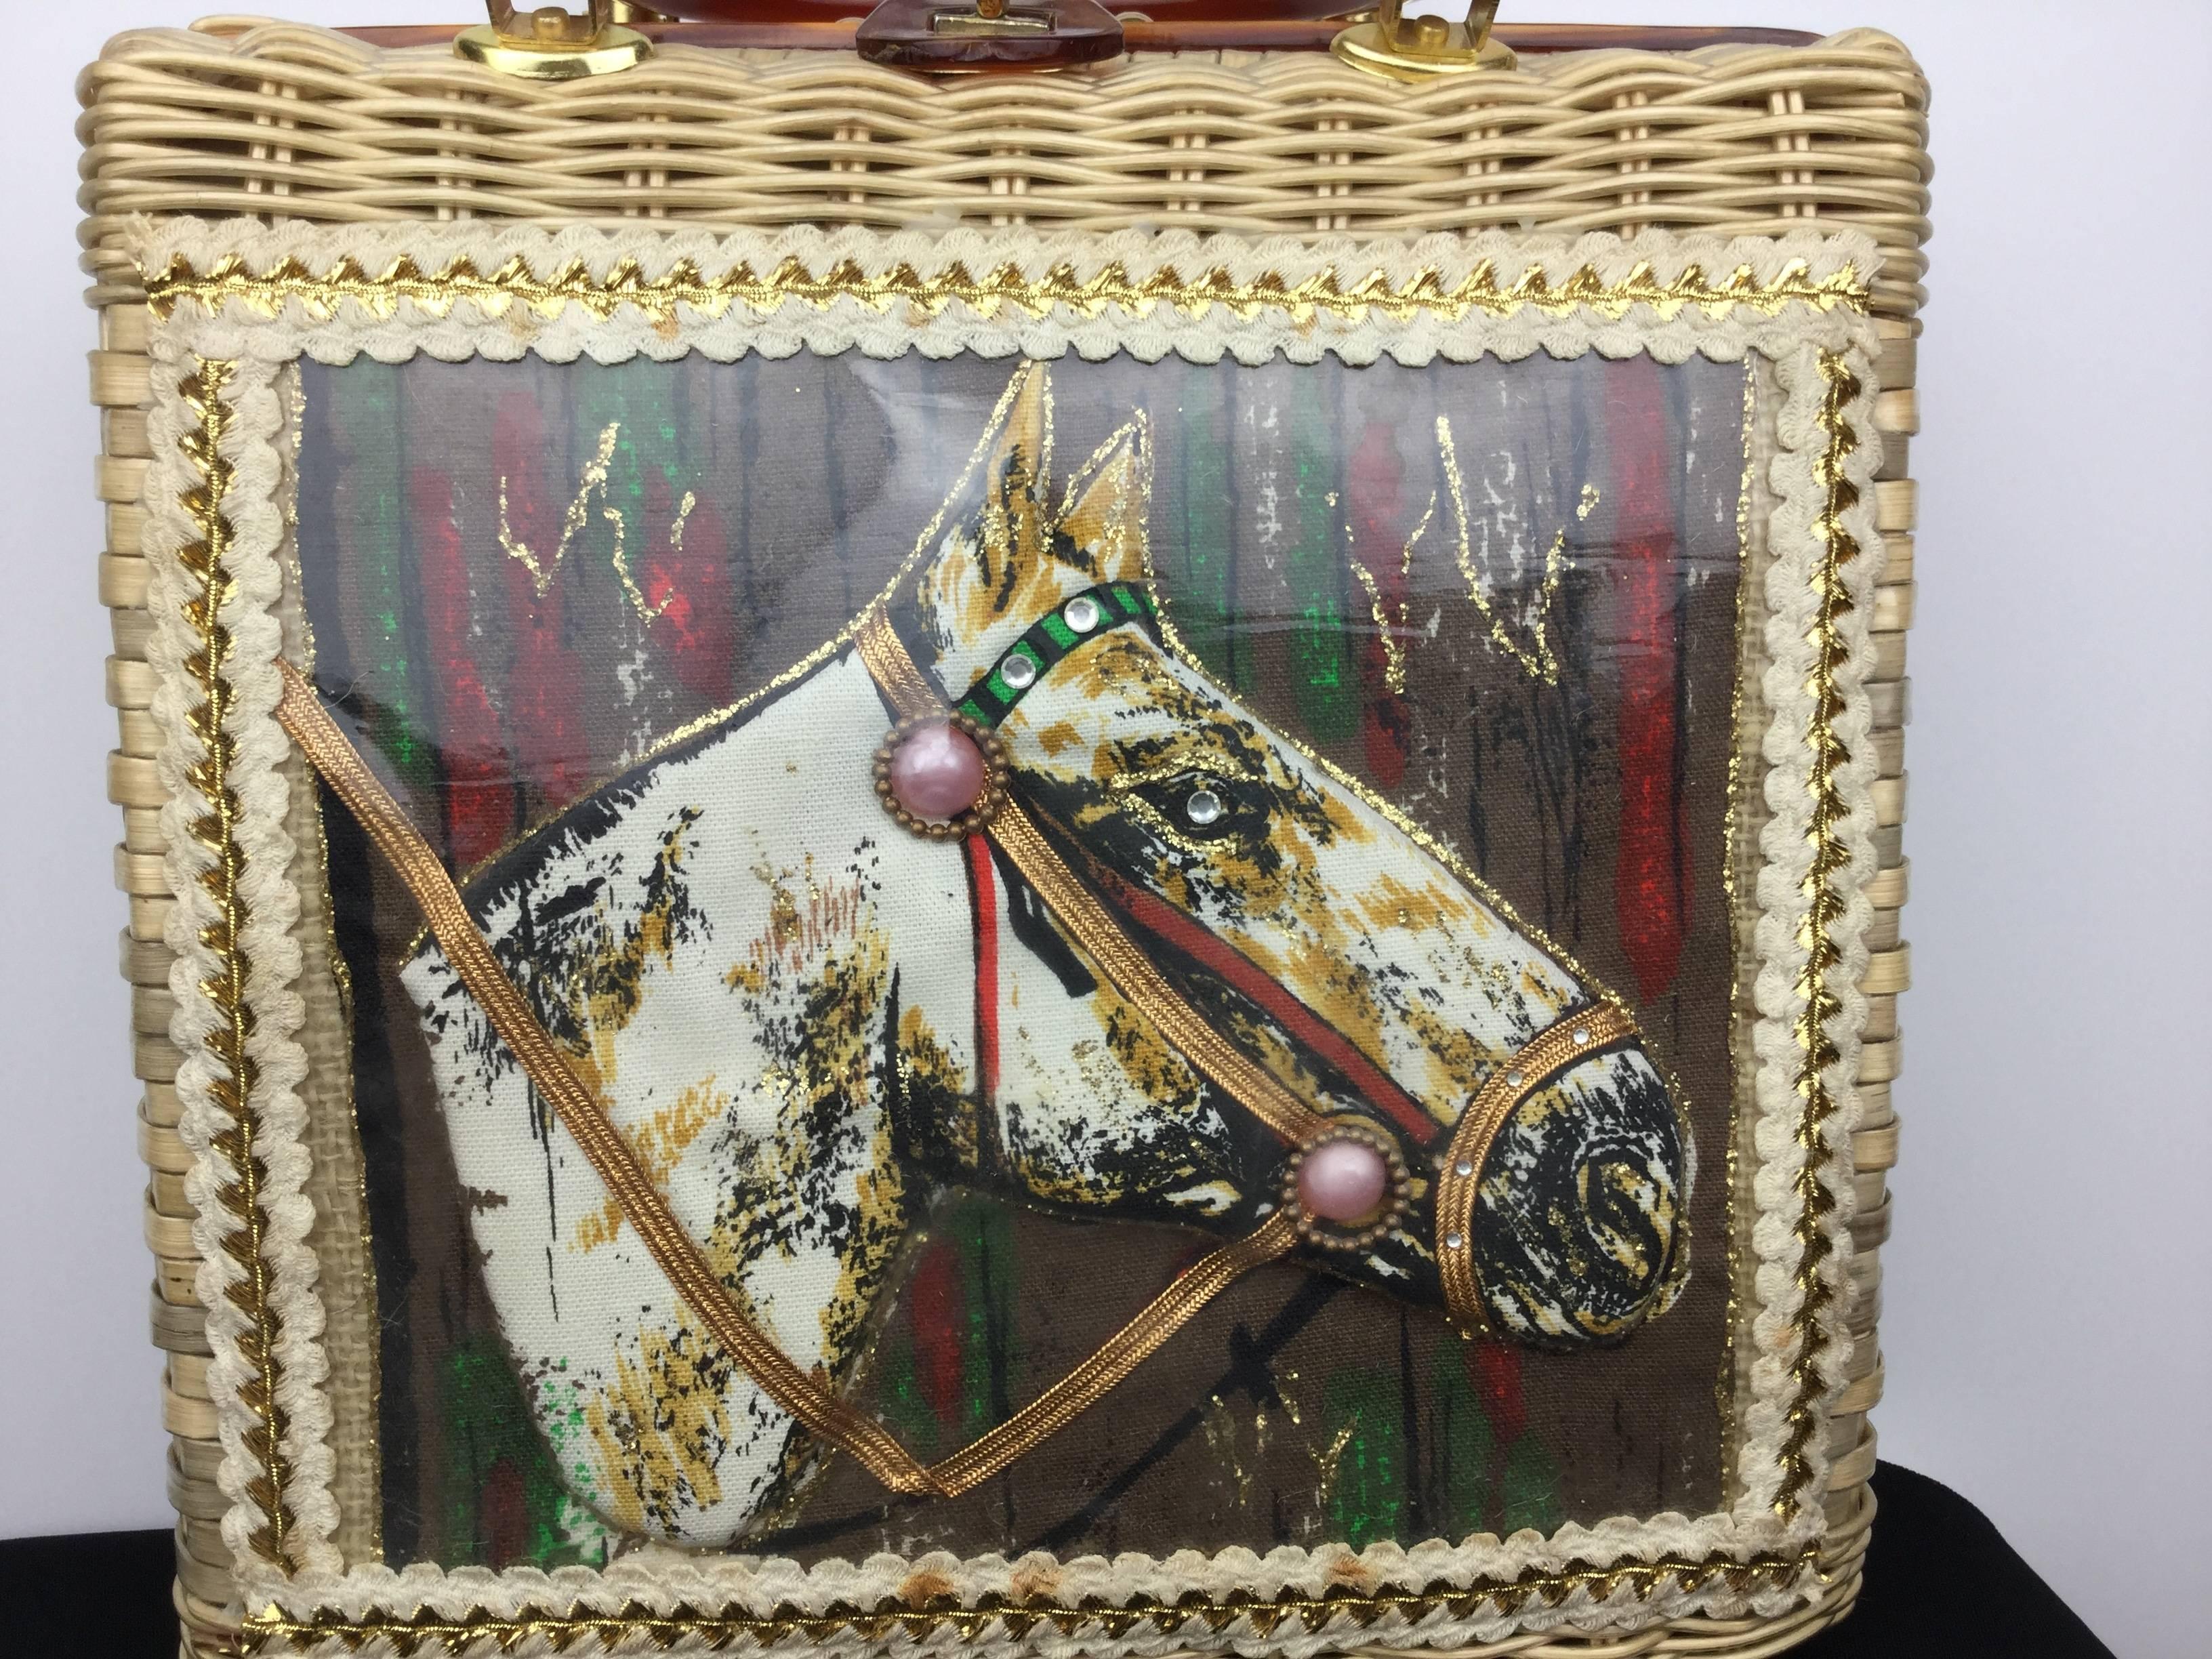 
Attractive and unusual equestrian themed vintage wicker handbag dating from the mid 1950's.

The fabric horse portrait is raised from the background, as if quilted, creating a wonderful 3-D feel.

It is decorated with a collage of pastes, pink